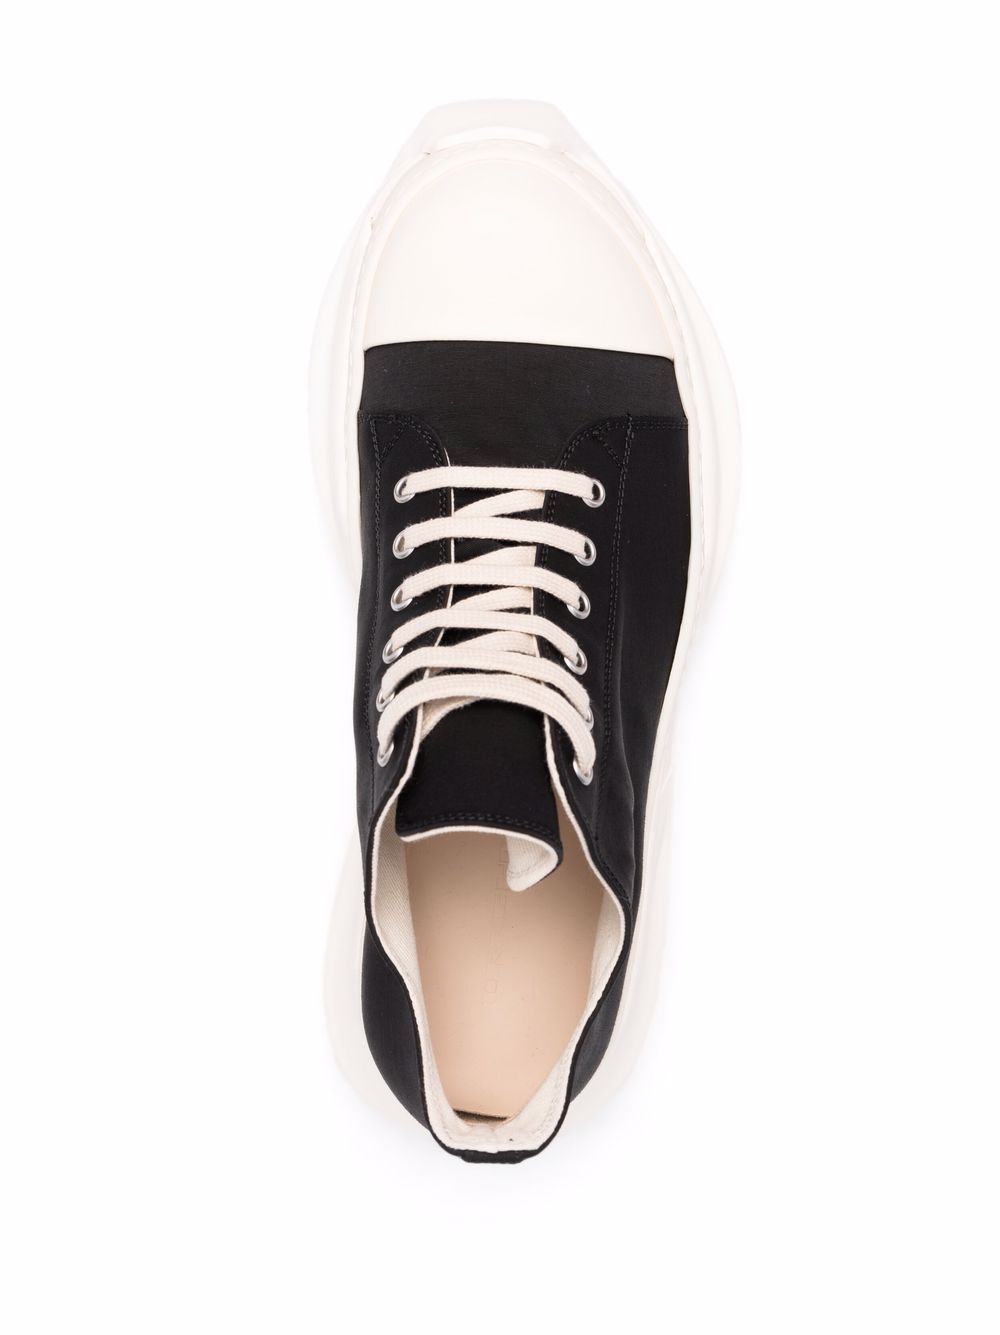 Rick Owens DRKSHDW Abstract Low Sneakers - Farfetch